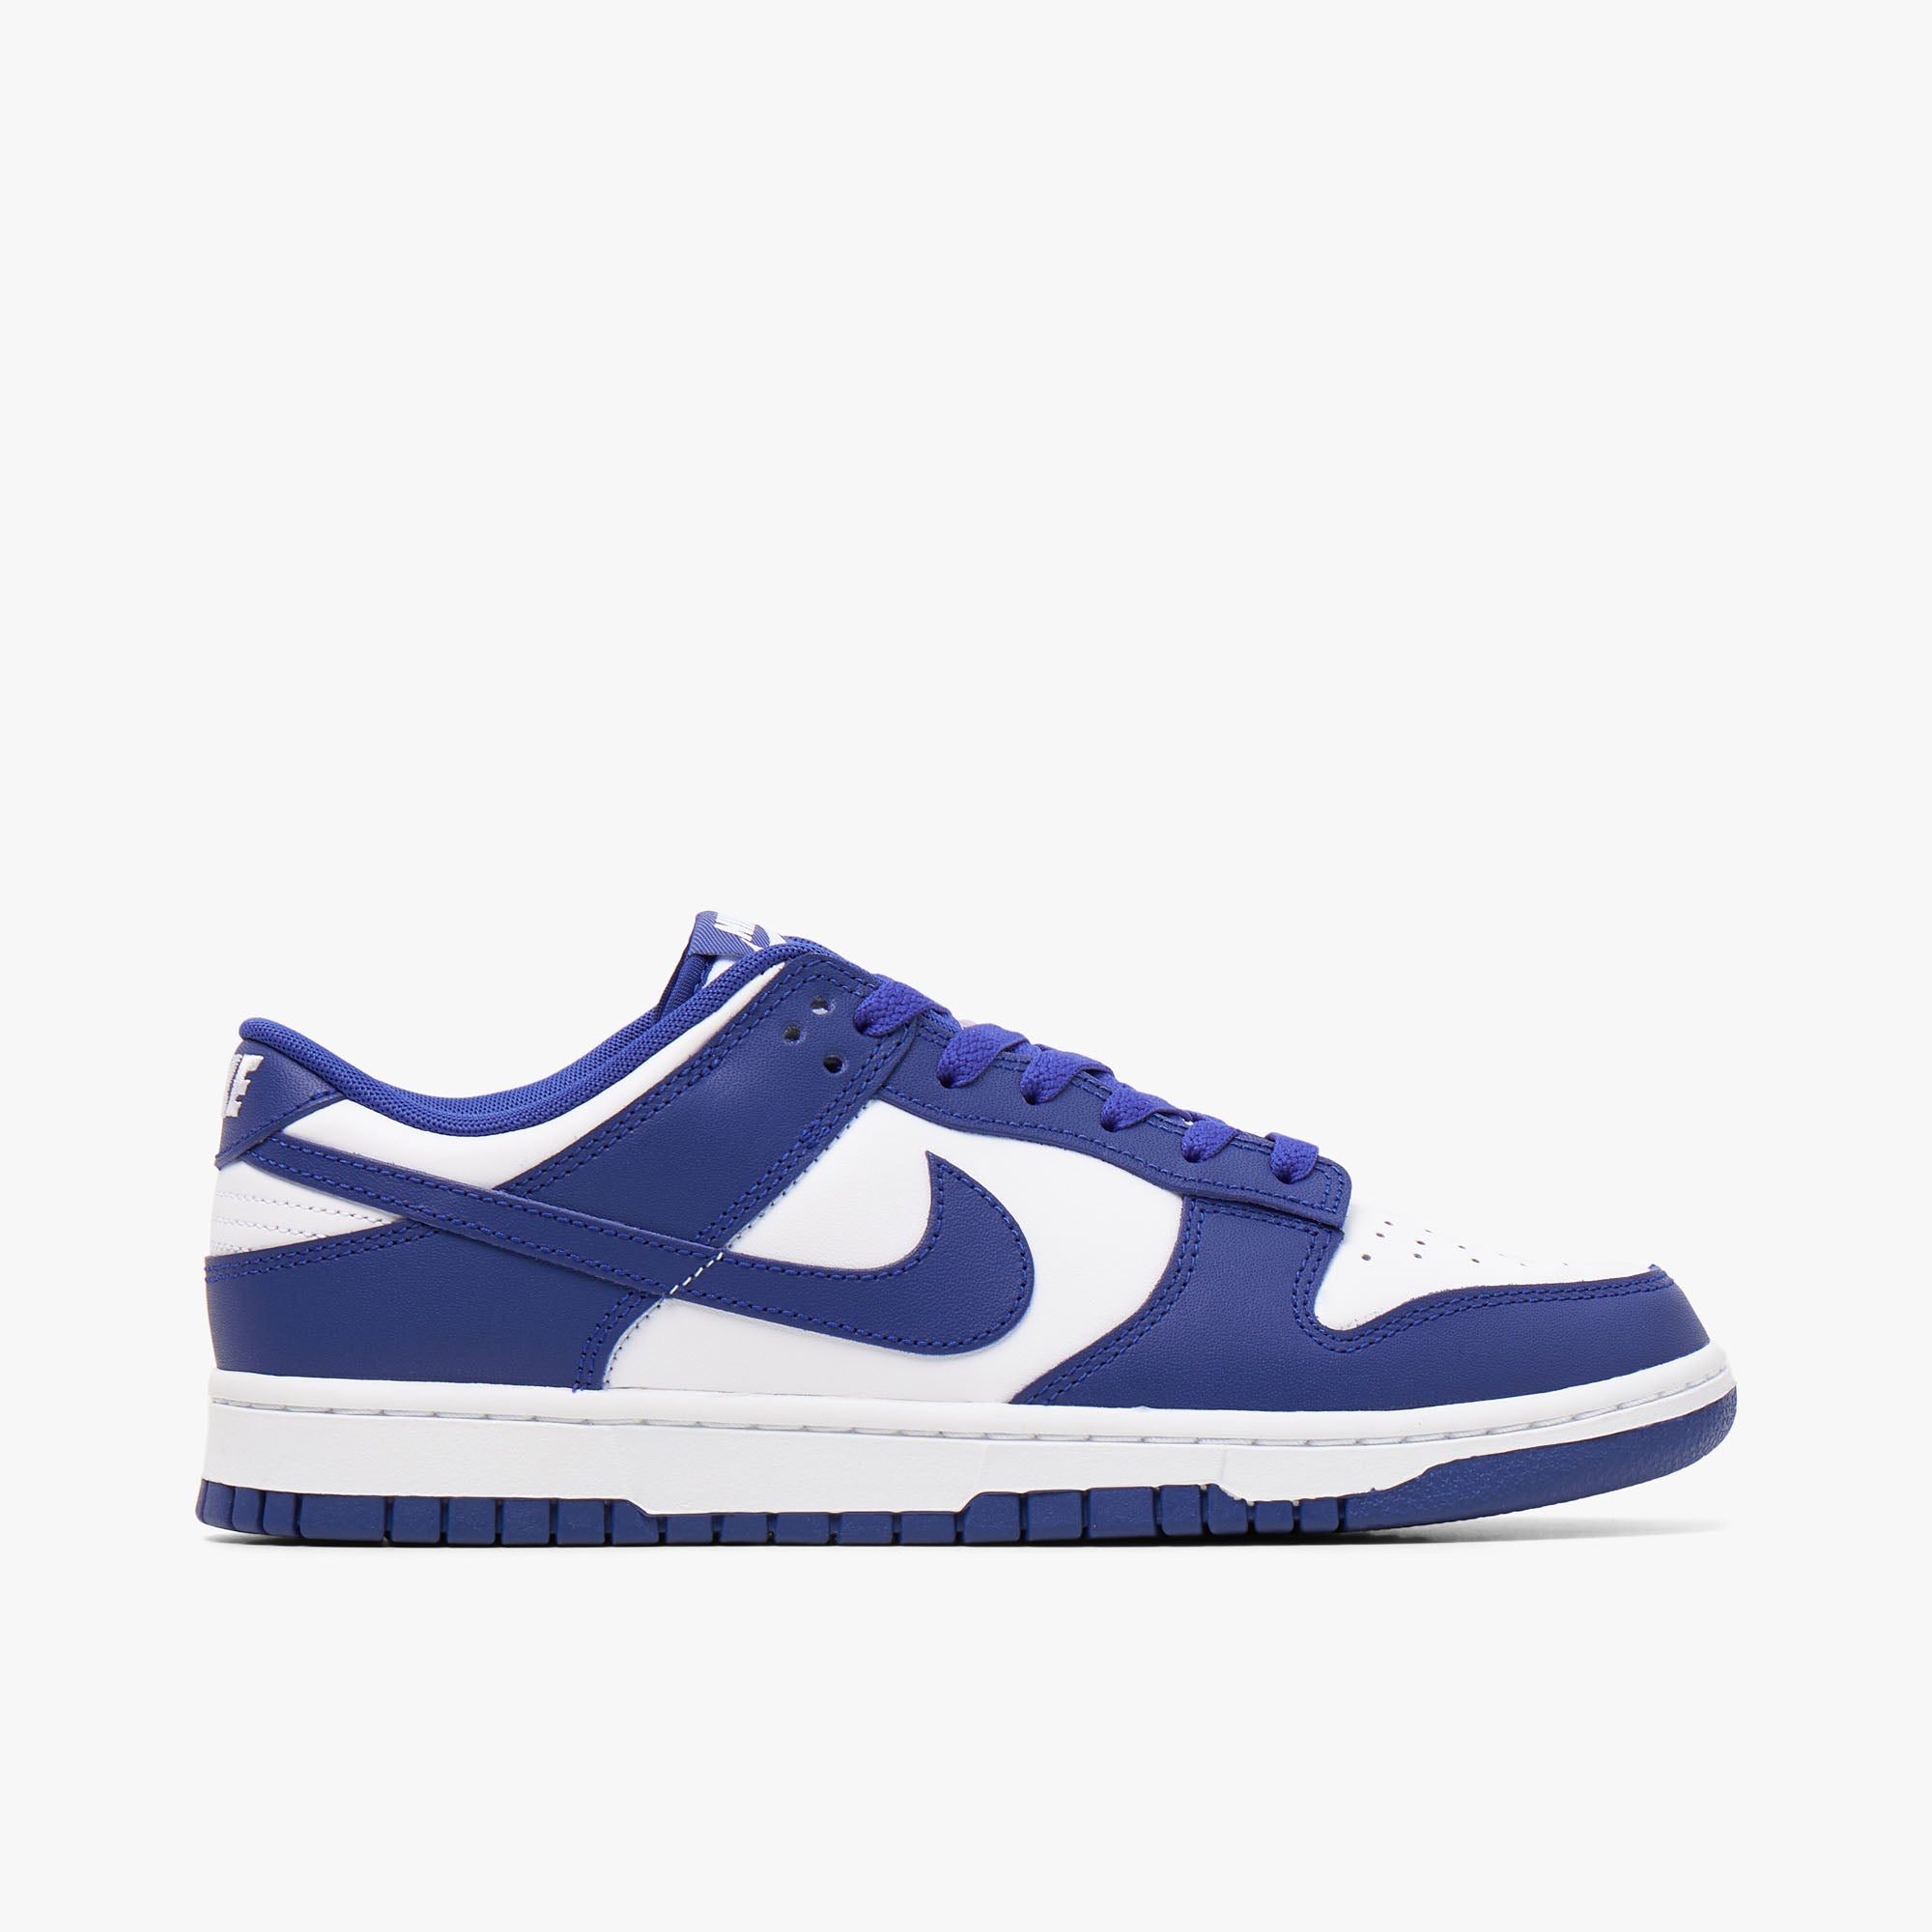 Nike Dunk Low Retro BTTYS White / Concord - University Red   1